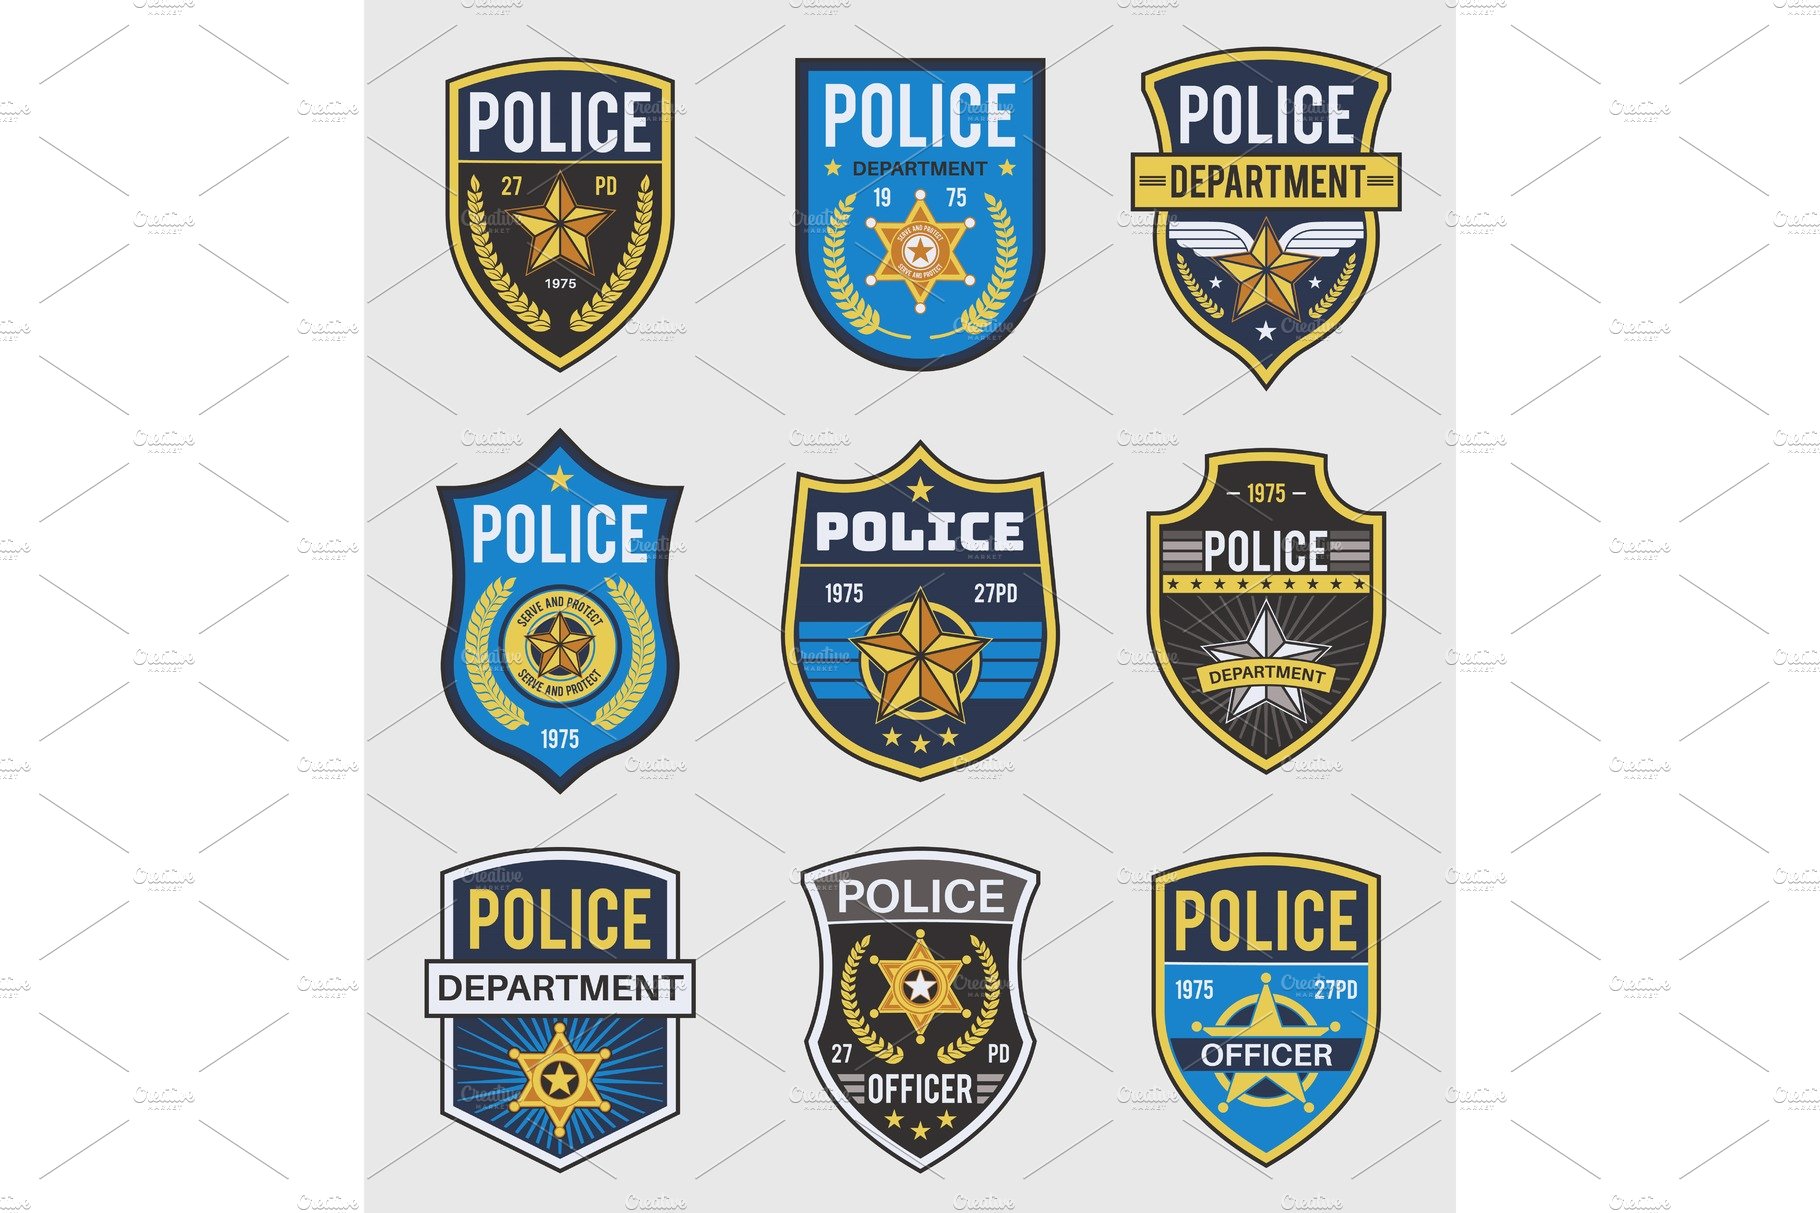 Police badges. Officer government cover image.